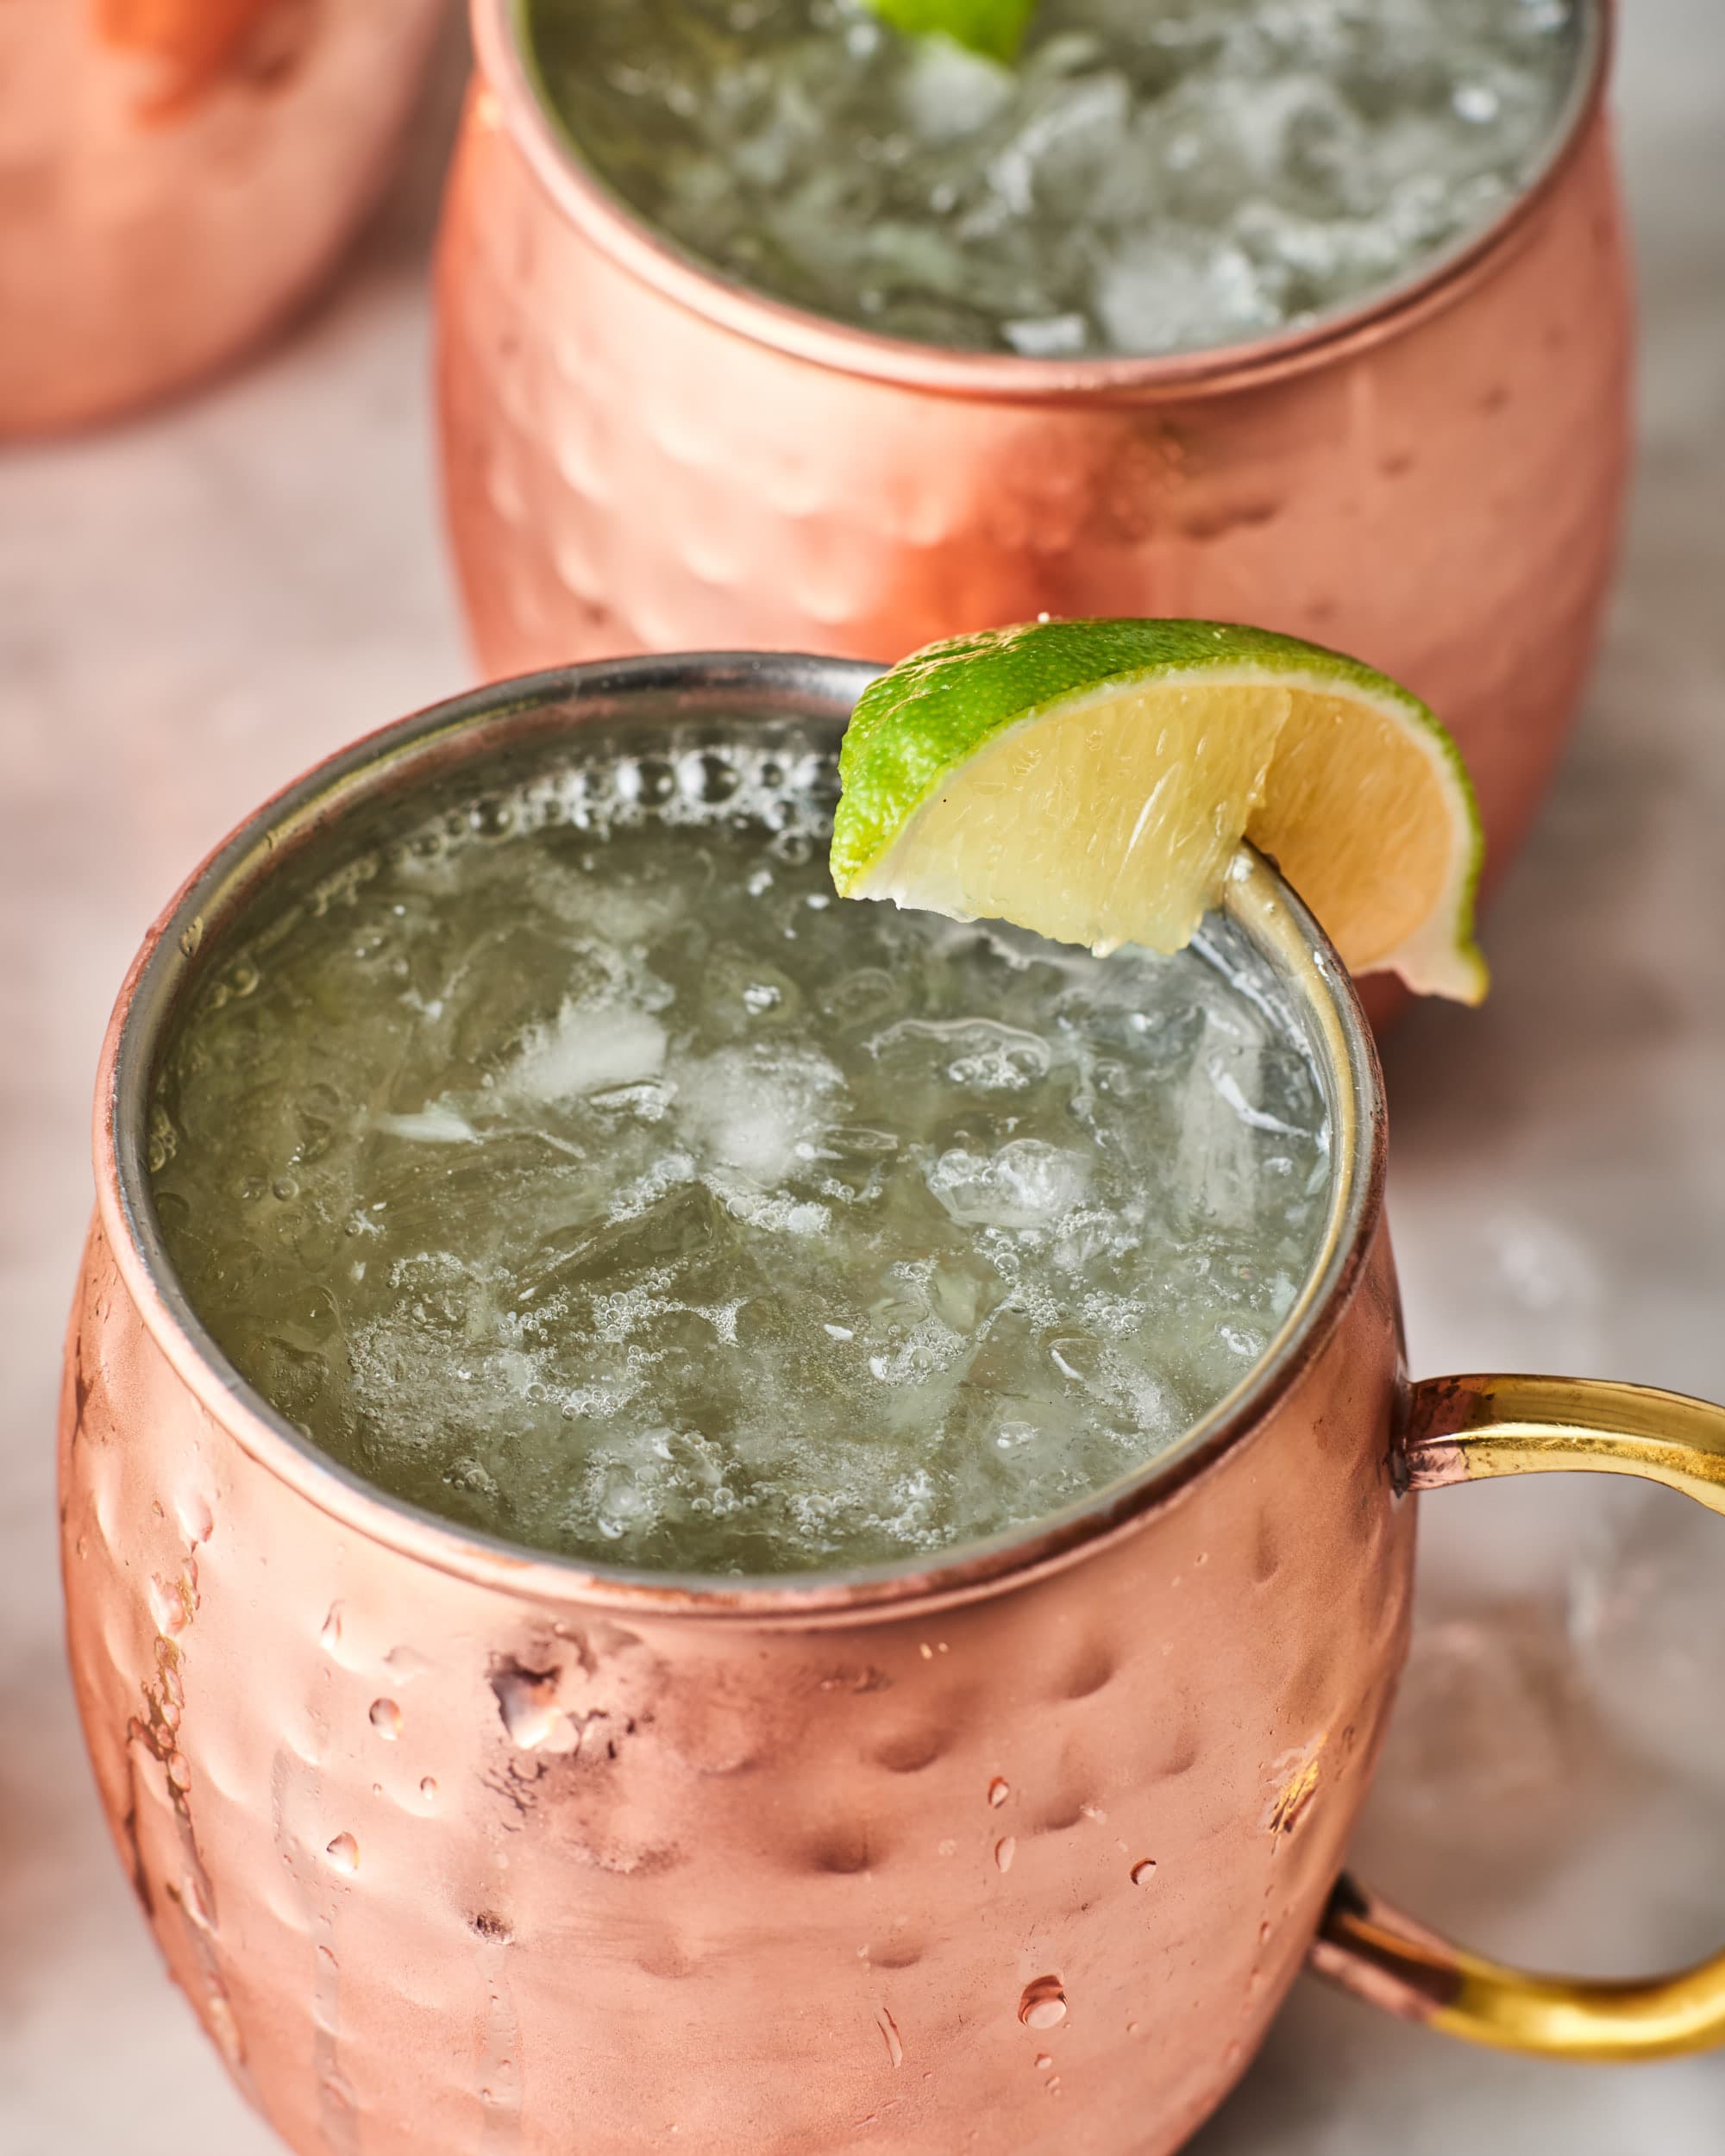 Best Moscow Mule Cocktail Recipe - How To Make AMoscow Mule